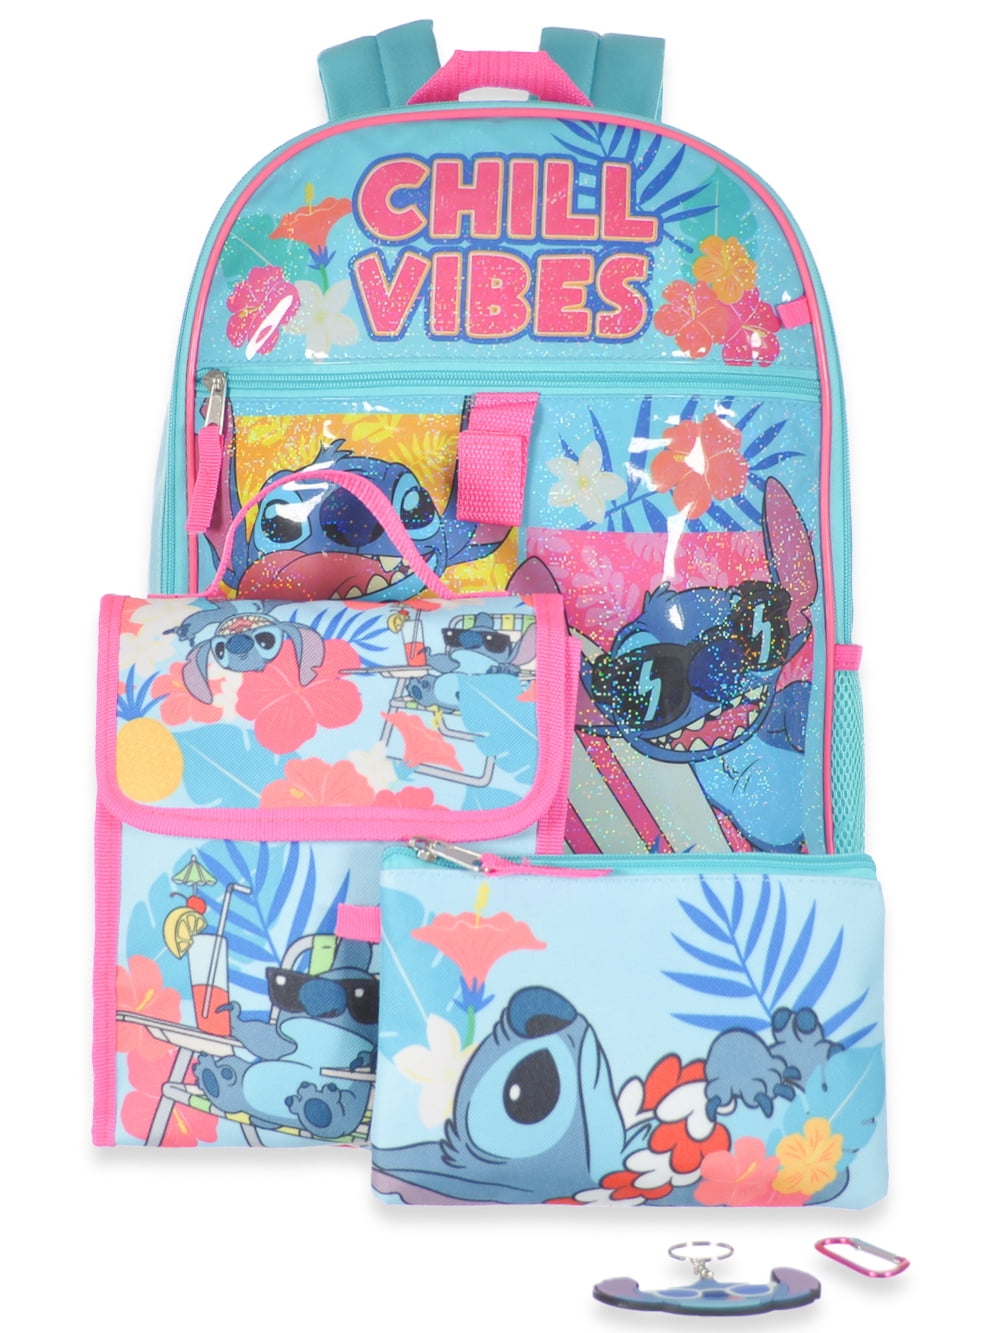 Lilo and Stitch Backpack Girl Backpack Schoolbag Stitch Disney